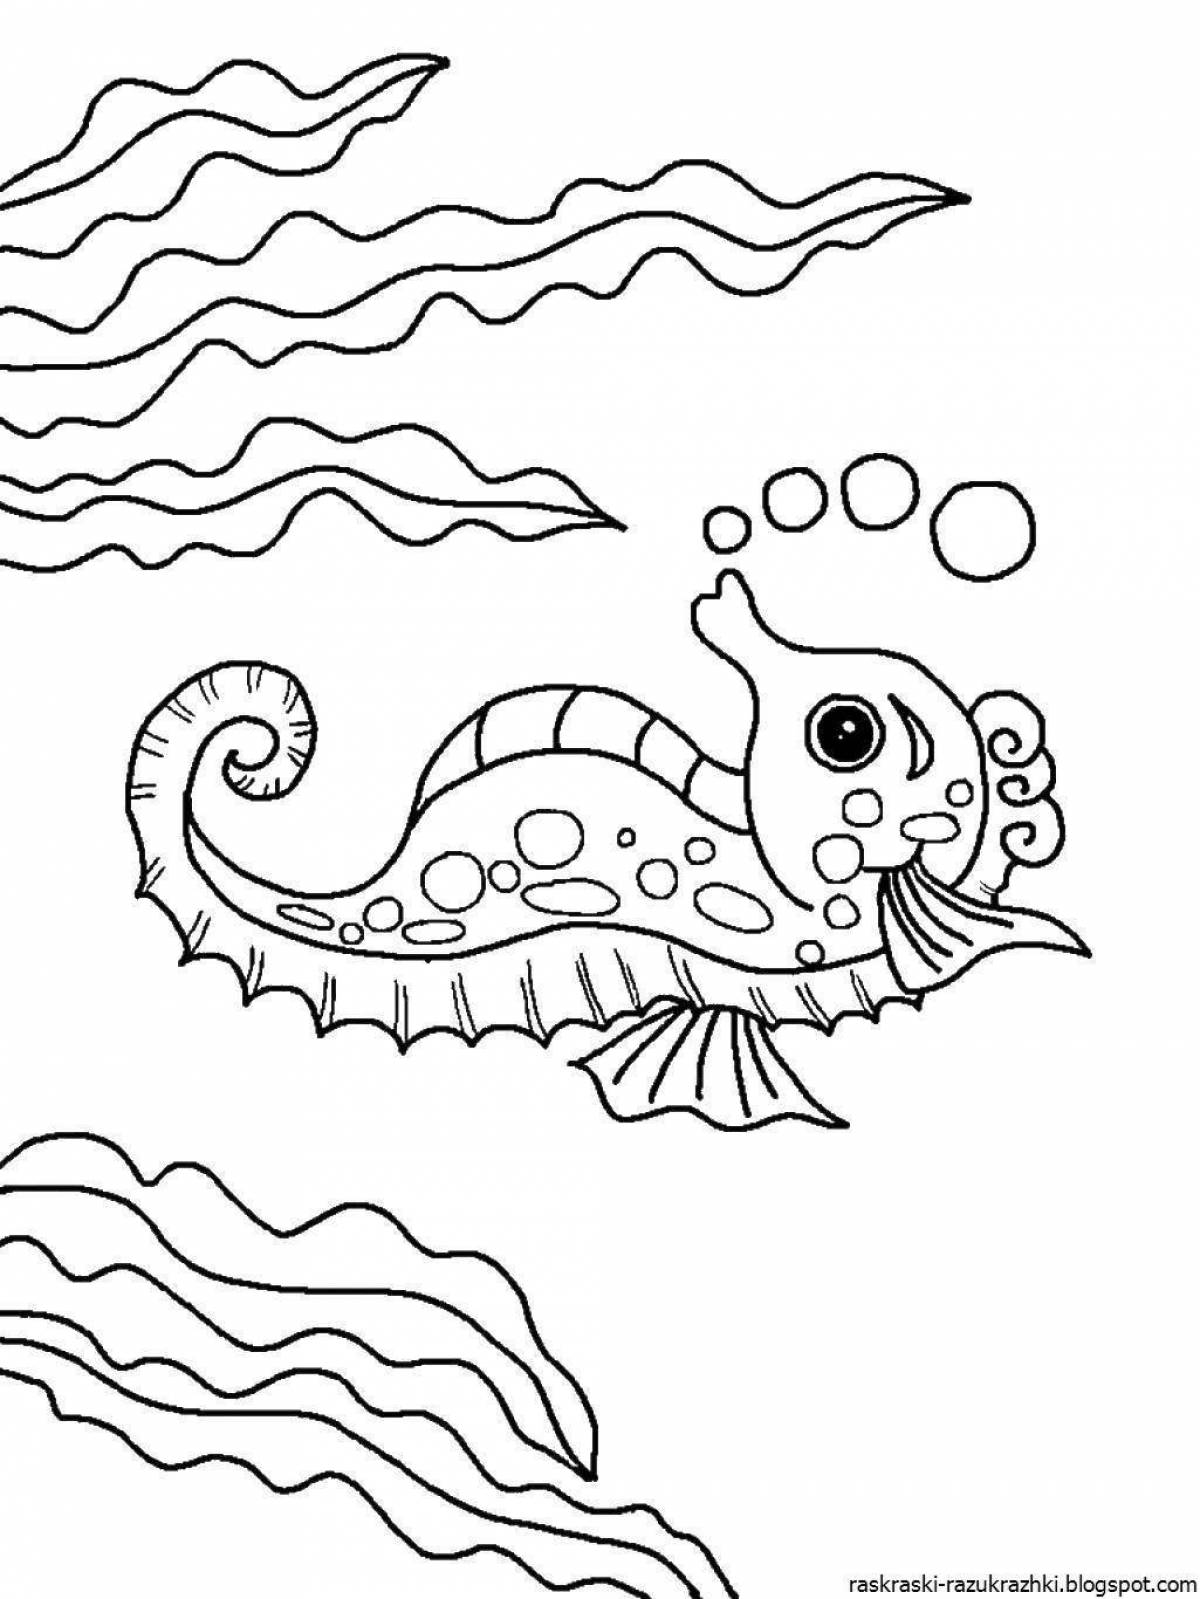 Glowing seabed coloring book for kids